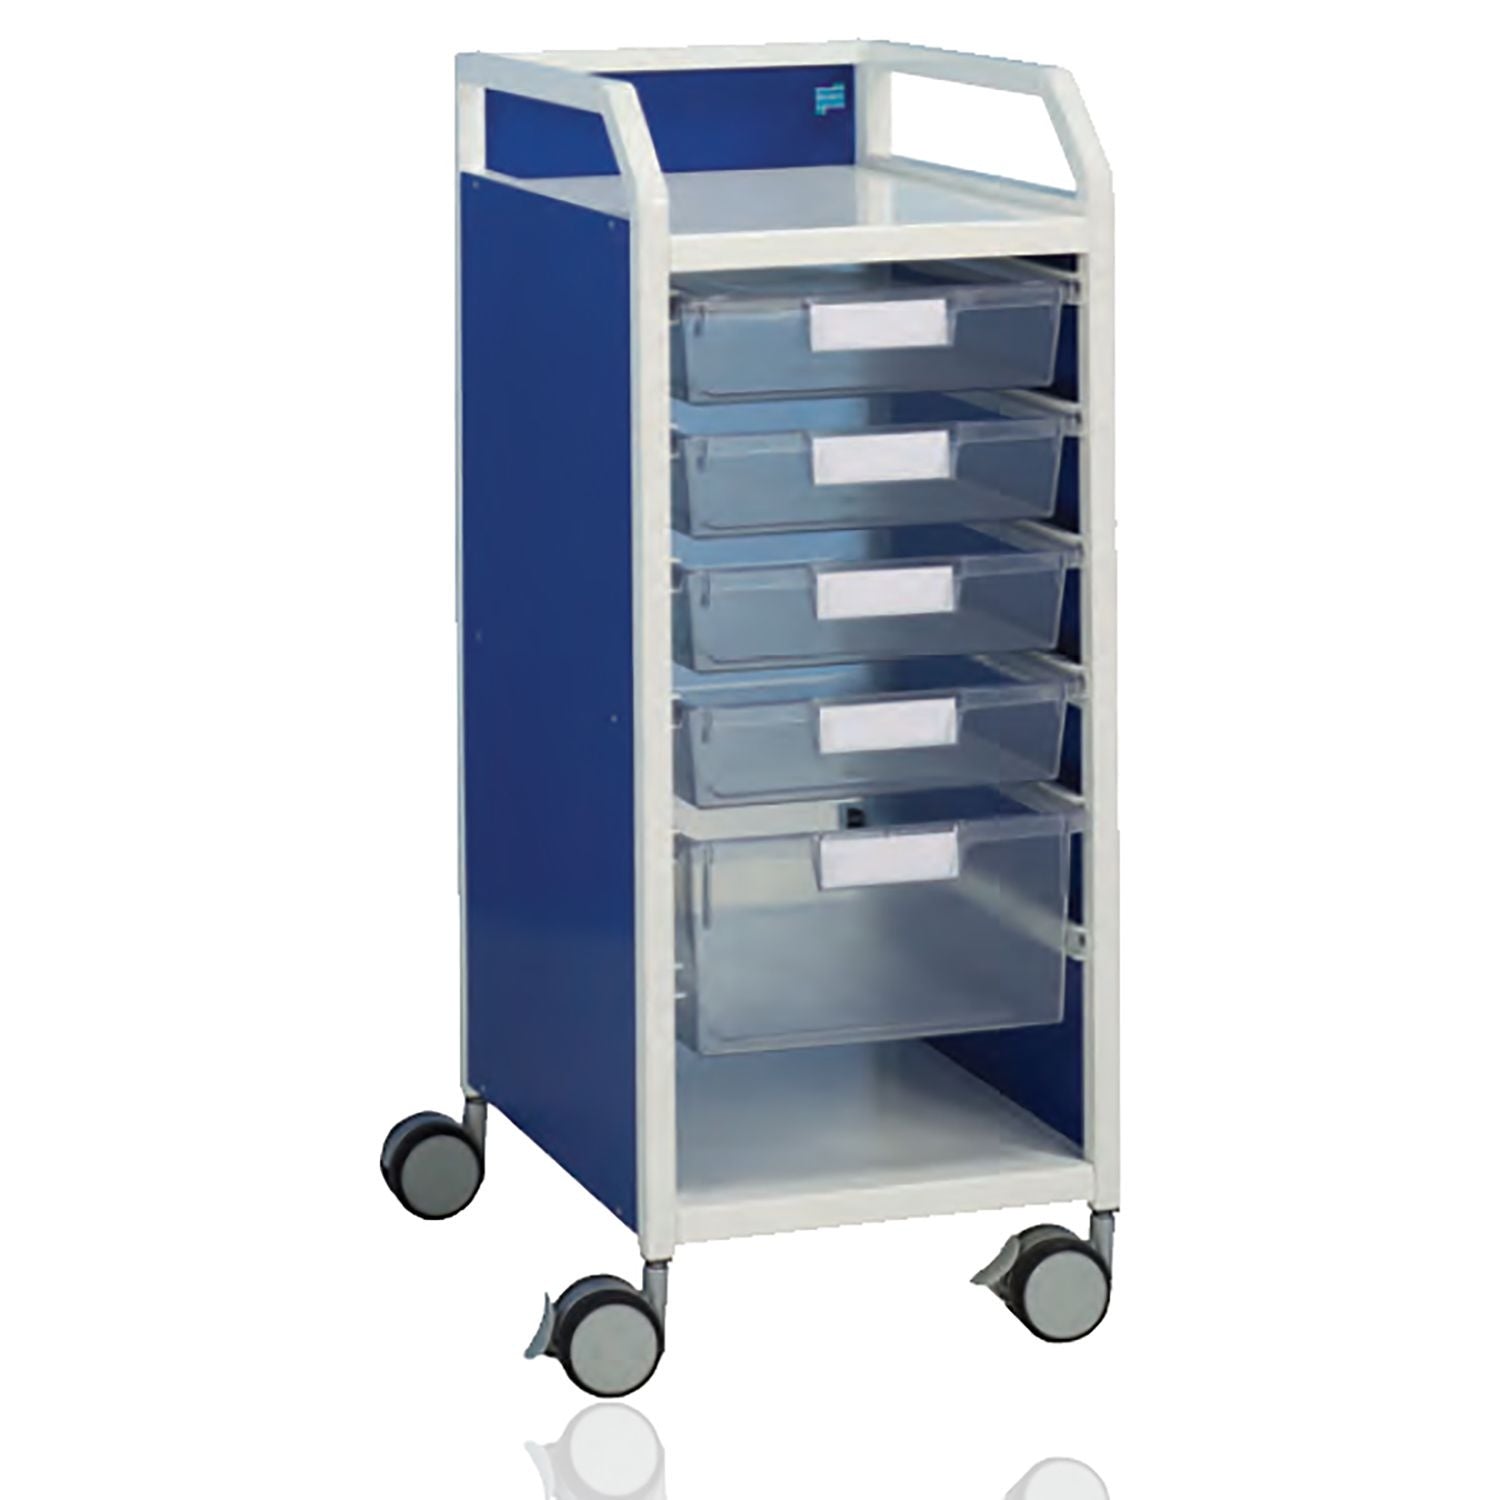 Howarth 2 Trolley with Aston Panels 960 x 265 x 445mm (HxWxD)